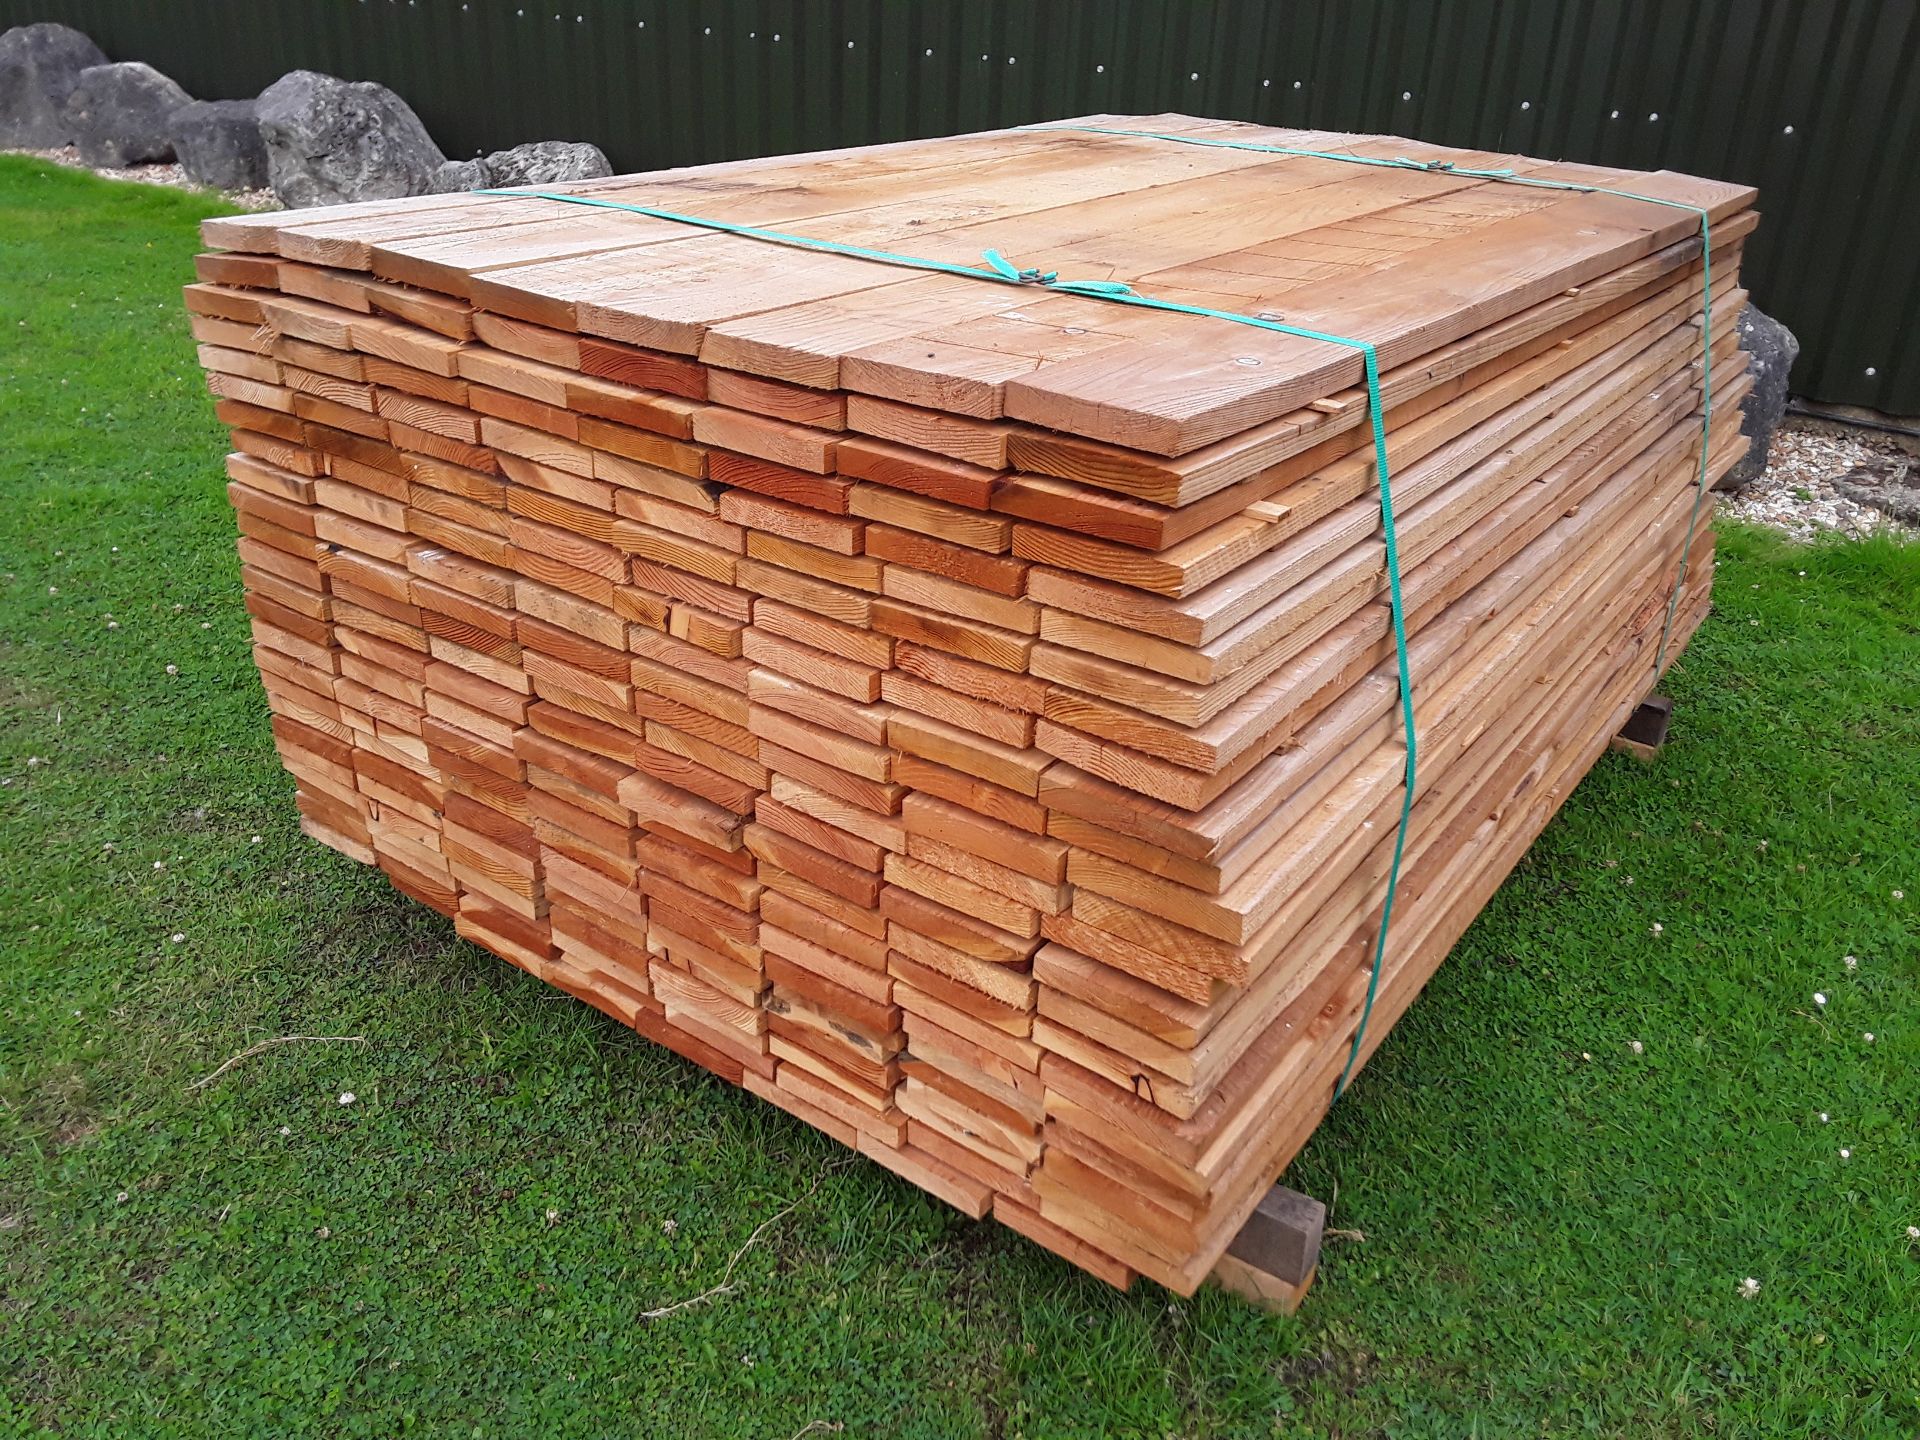 50x Softwood Fresh Sawn Mixed Larch / Douglas Fir Boards / Planks / Cladding 1" x 6" x 6FT - Image 4 of 4